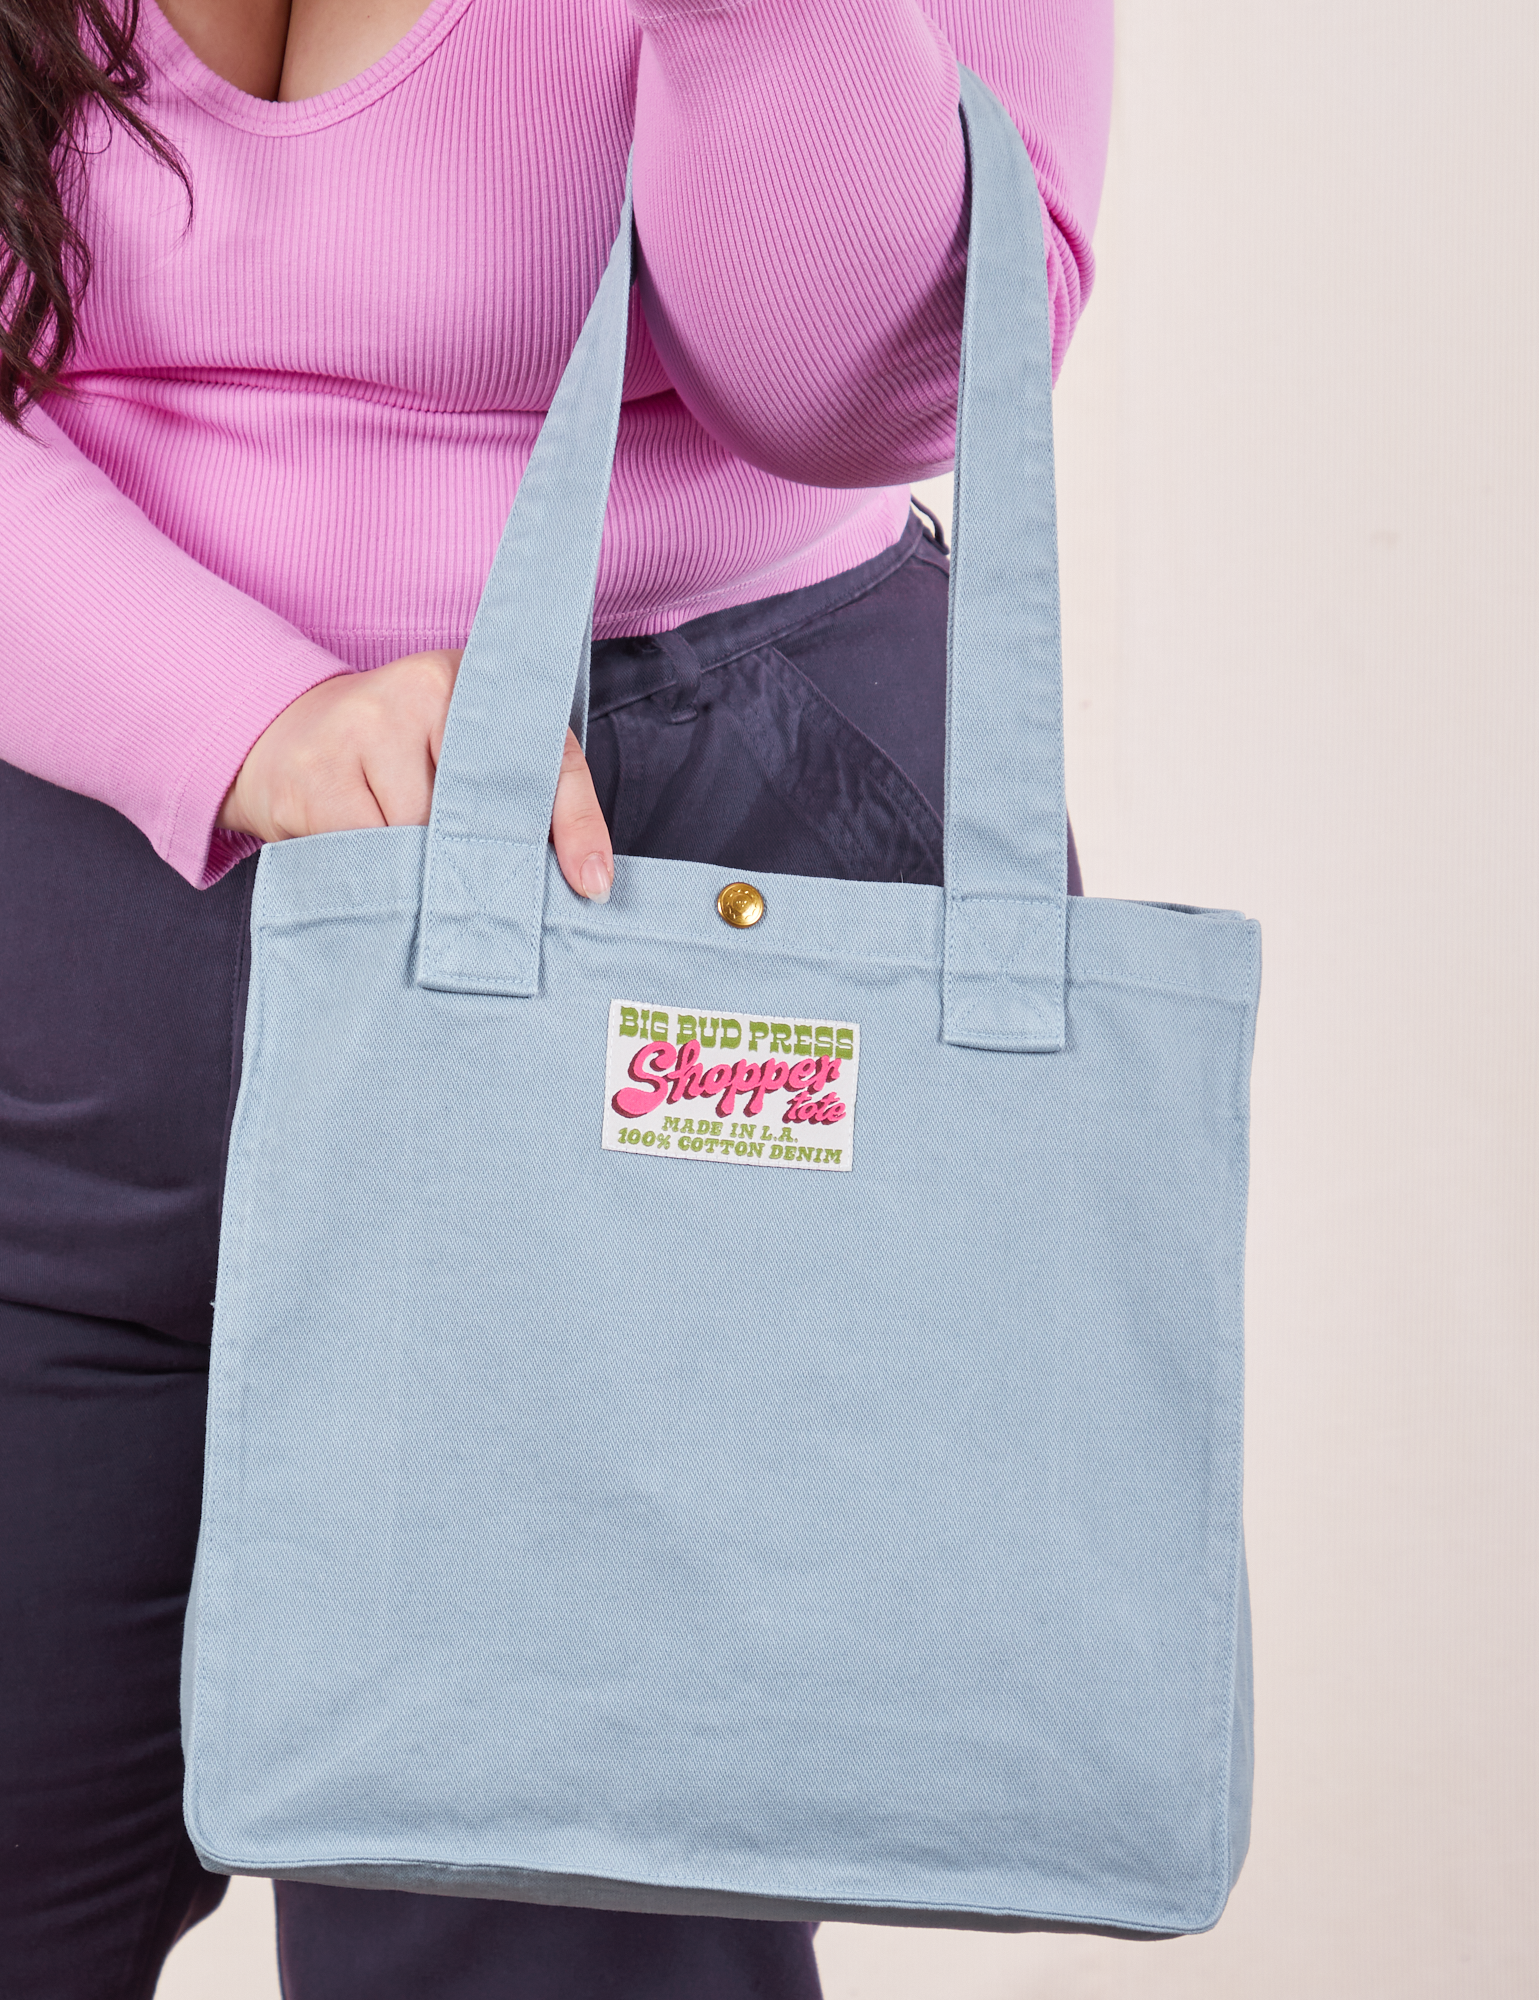 Shopper Tote Bag in Periwinkle worn on arm of model